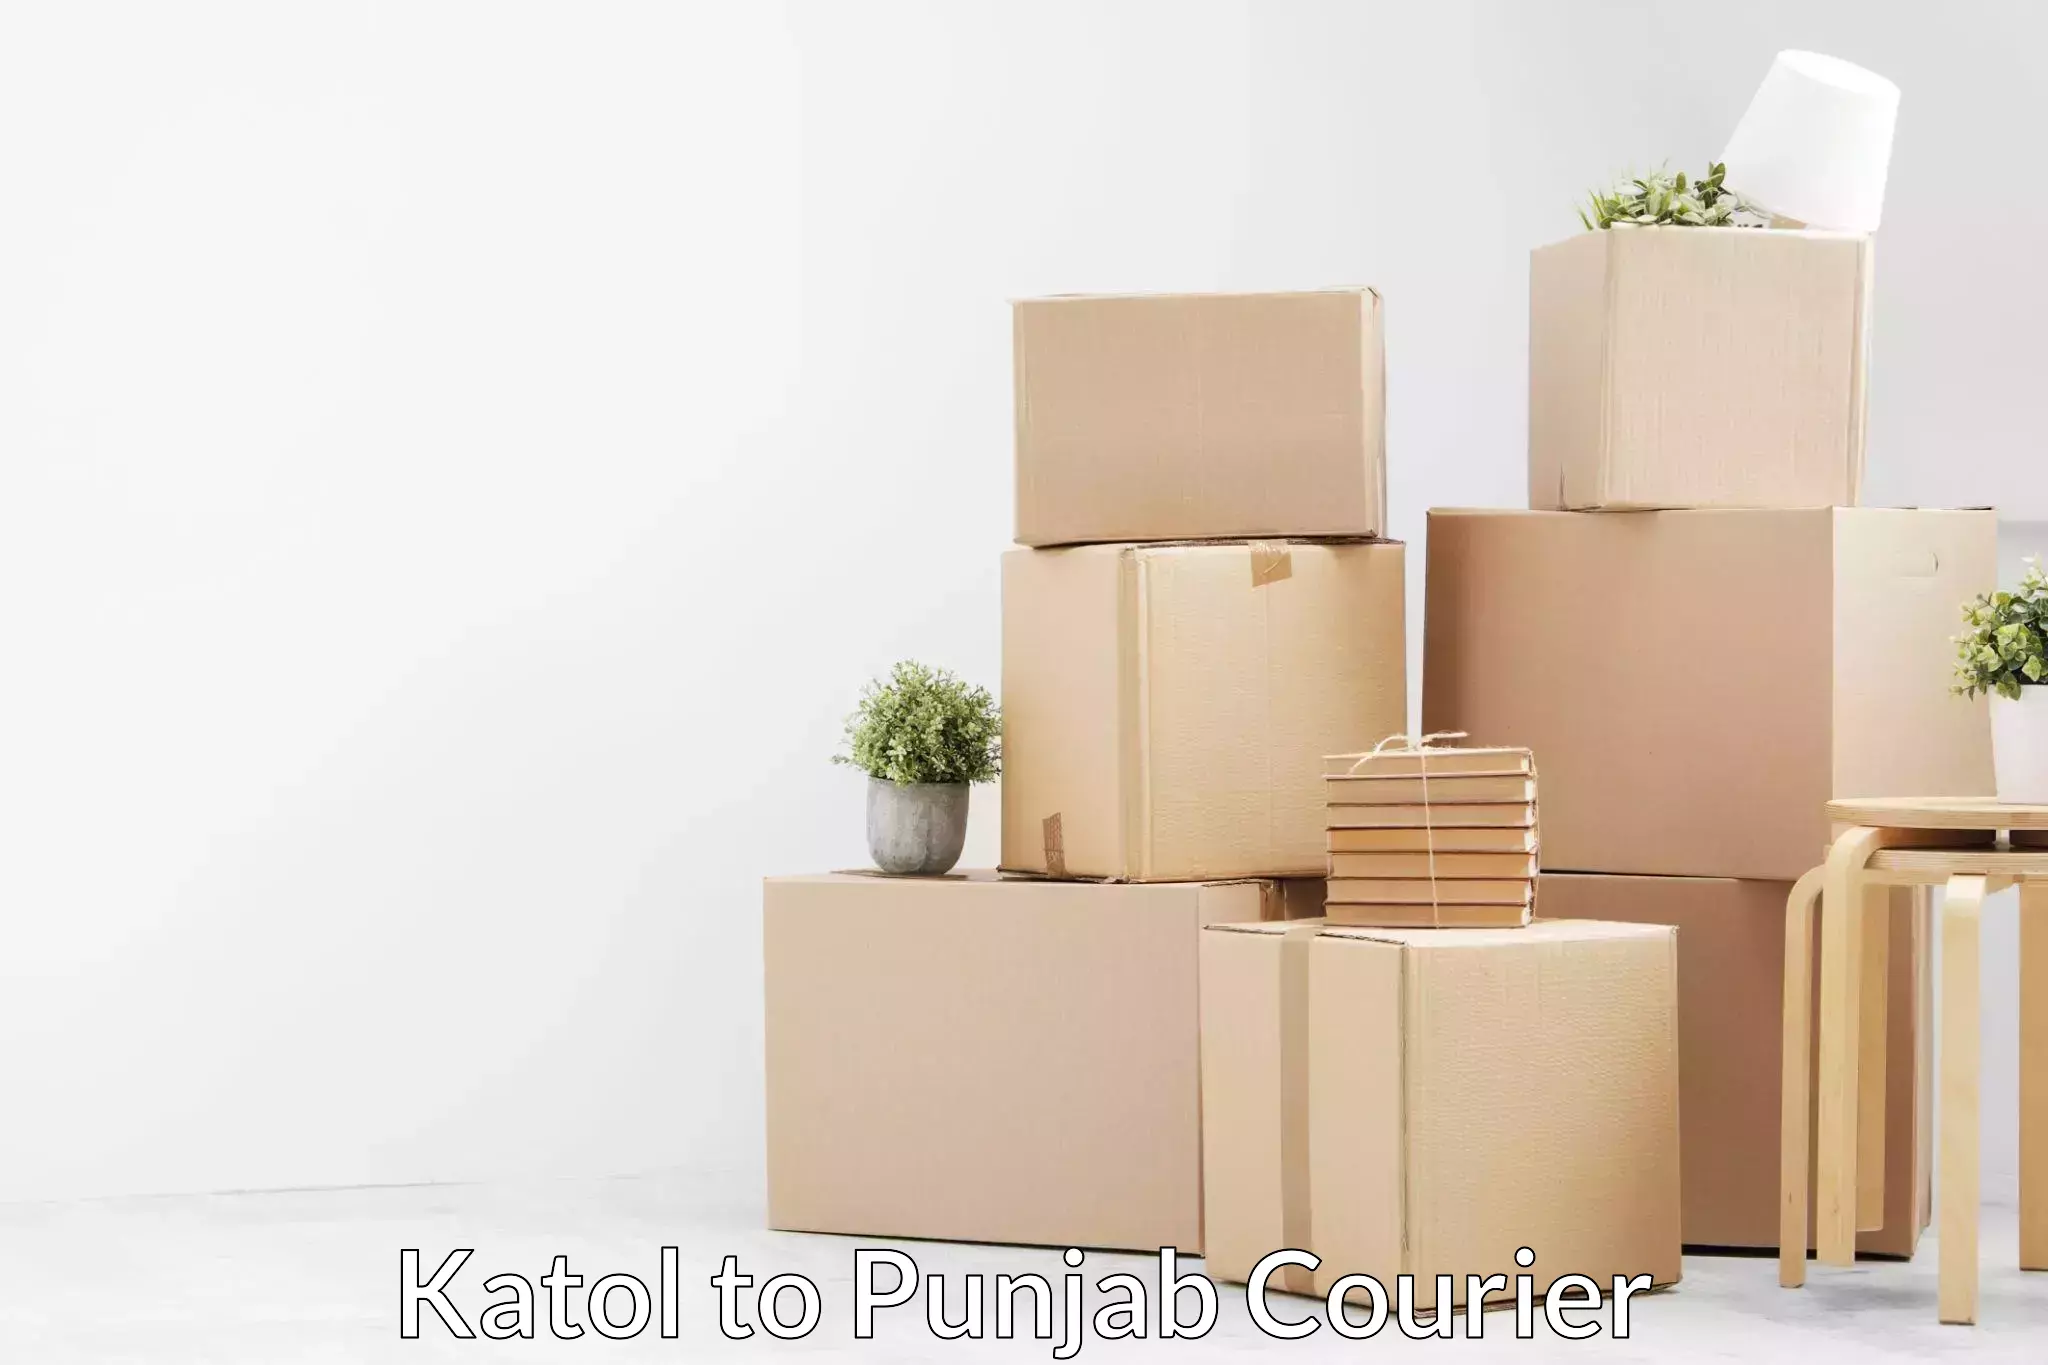 Quality relocation assistance in Katol to Mohali